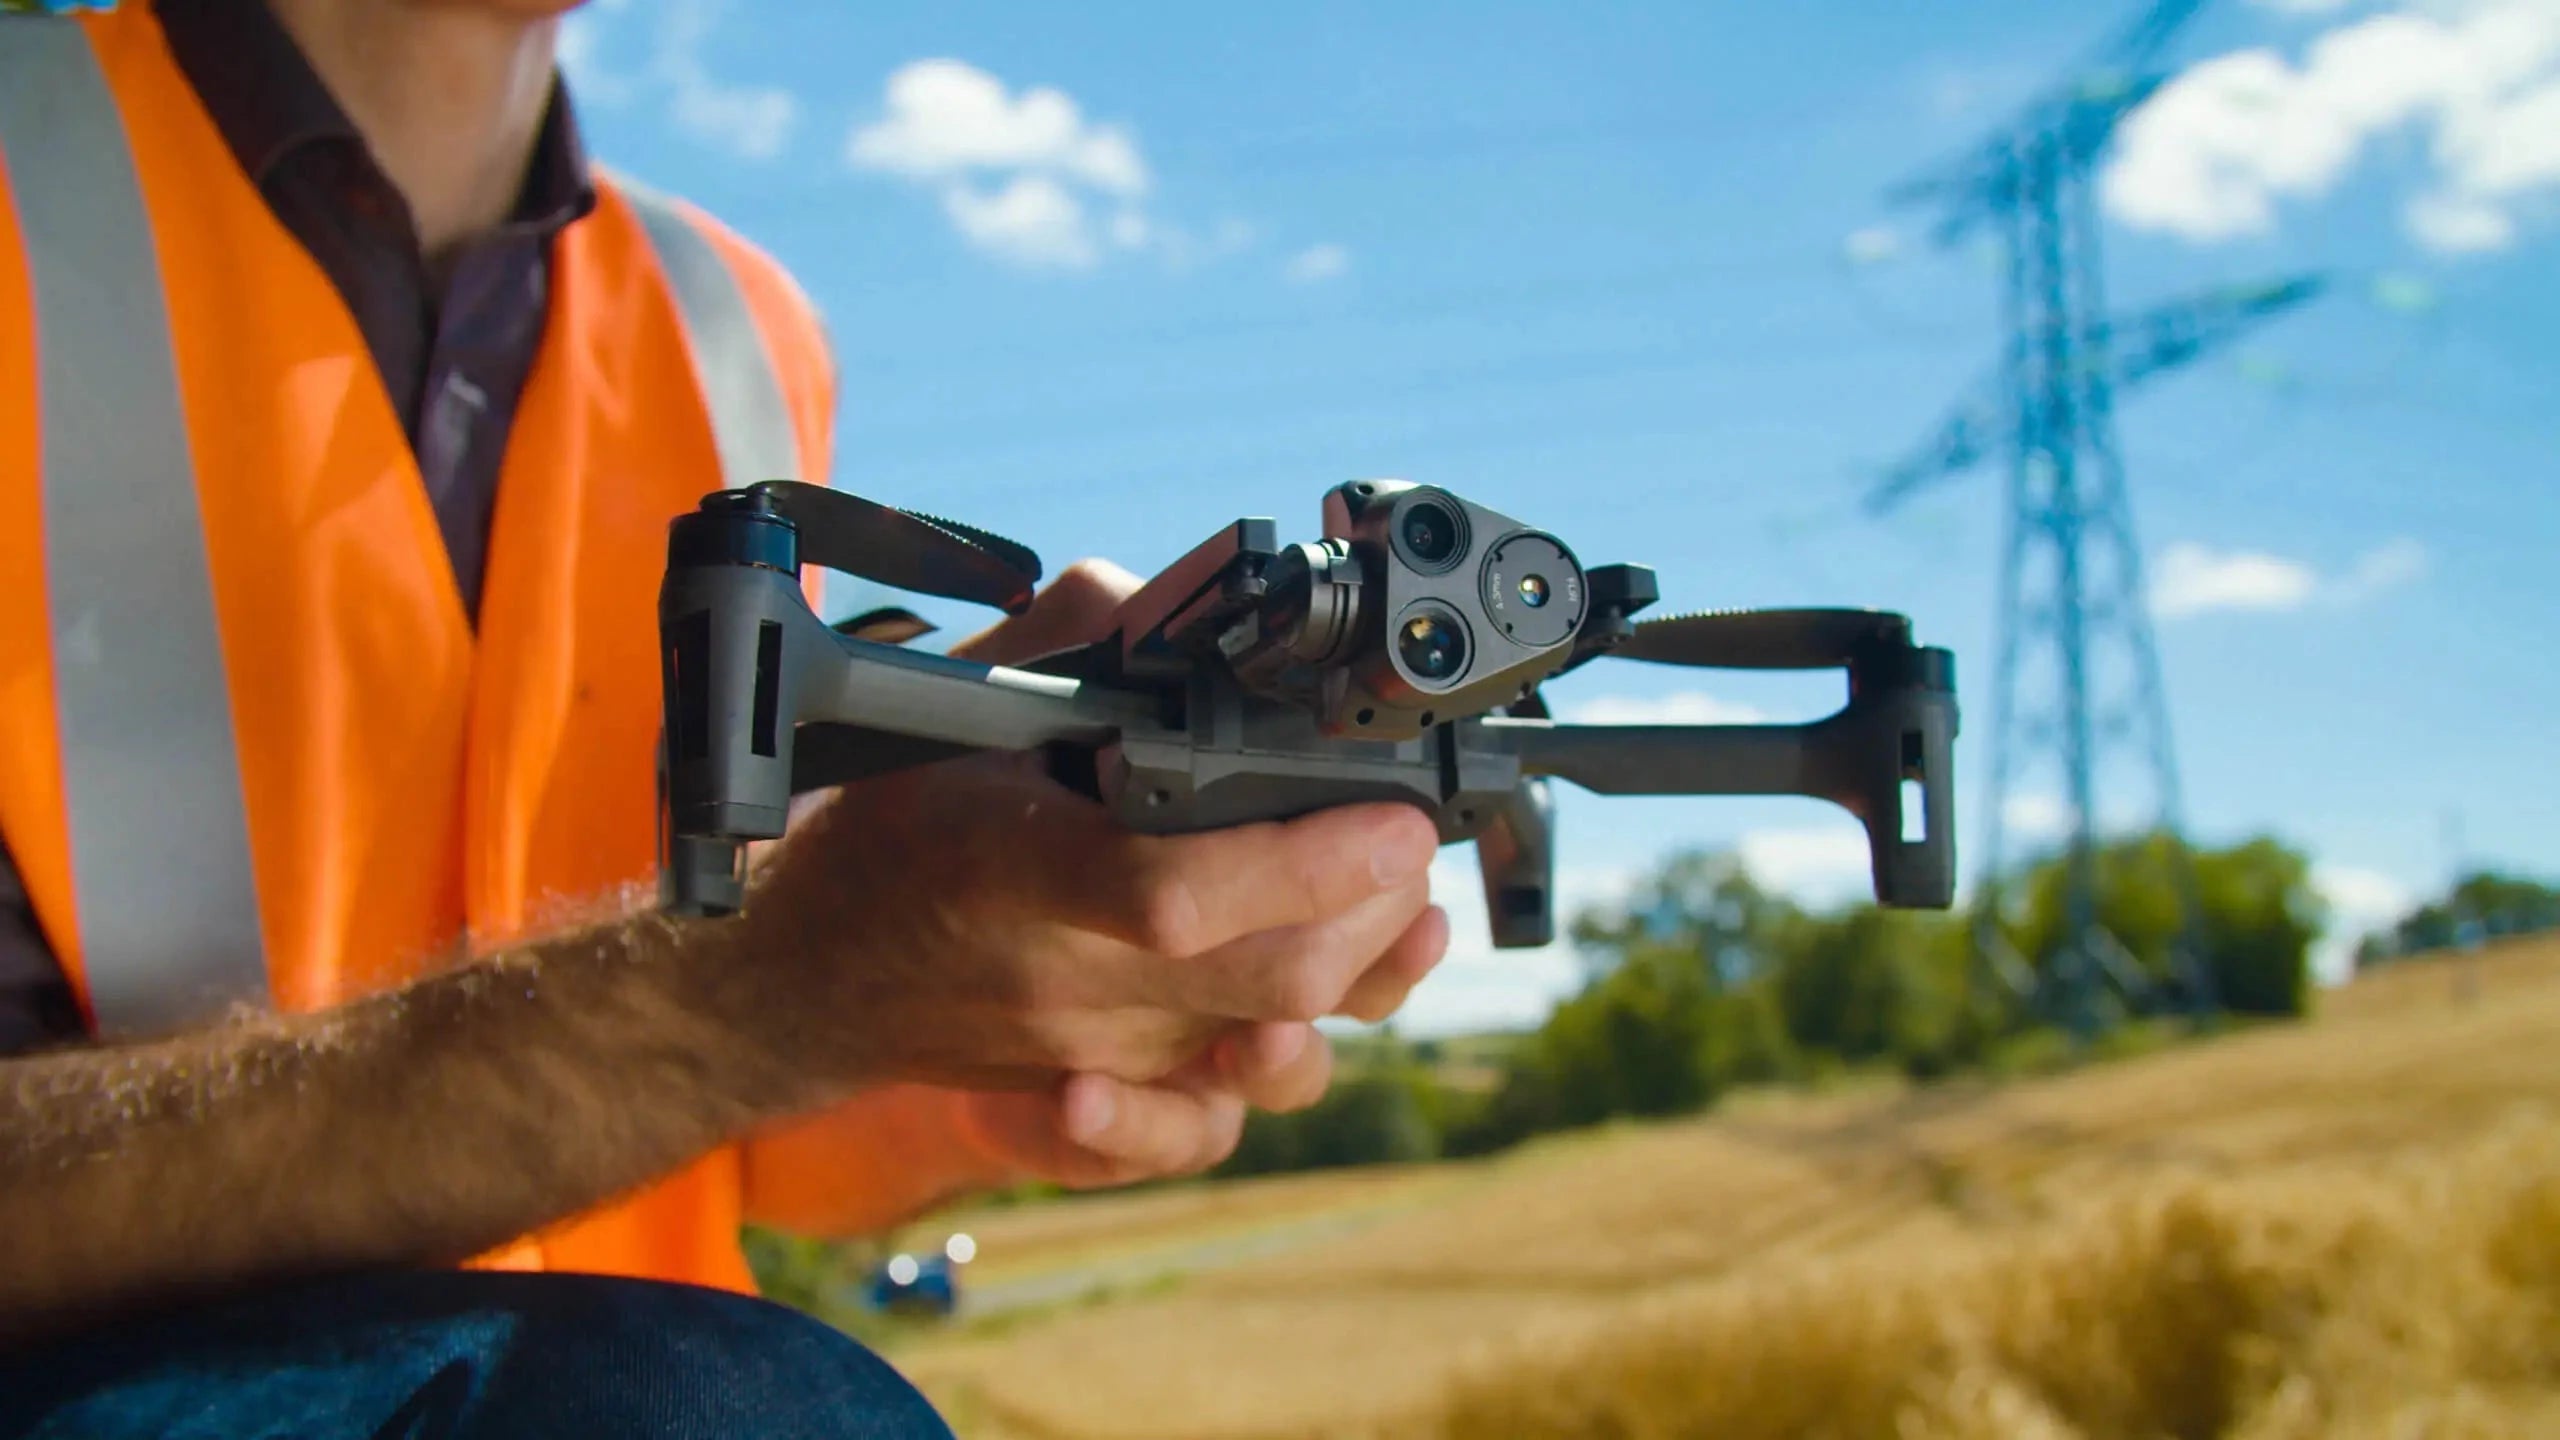 Florida Drone Supply sells Parrot Drone Systems